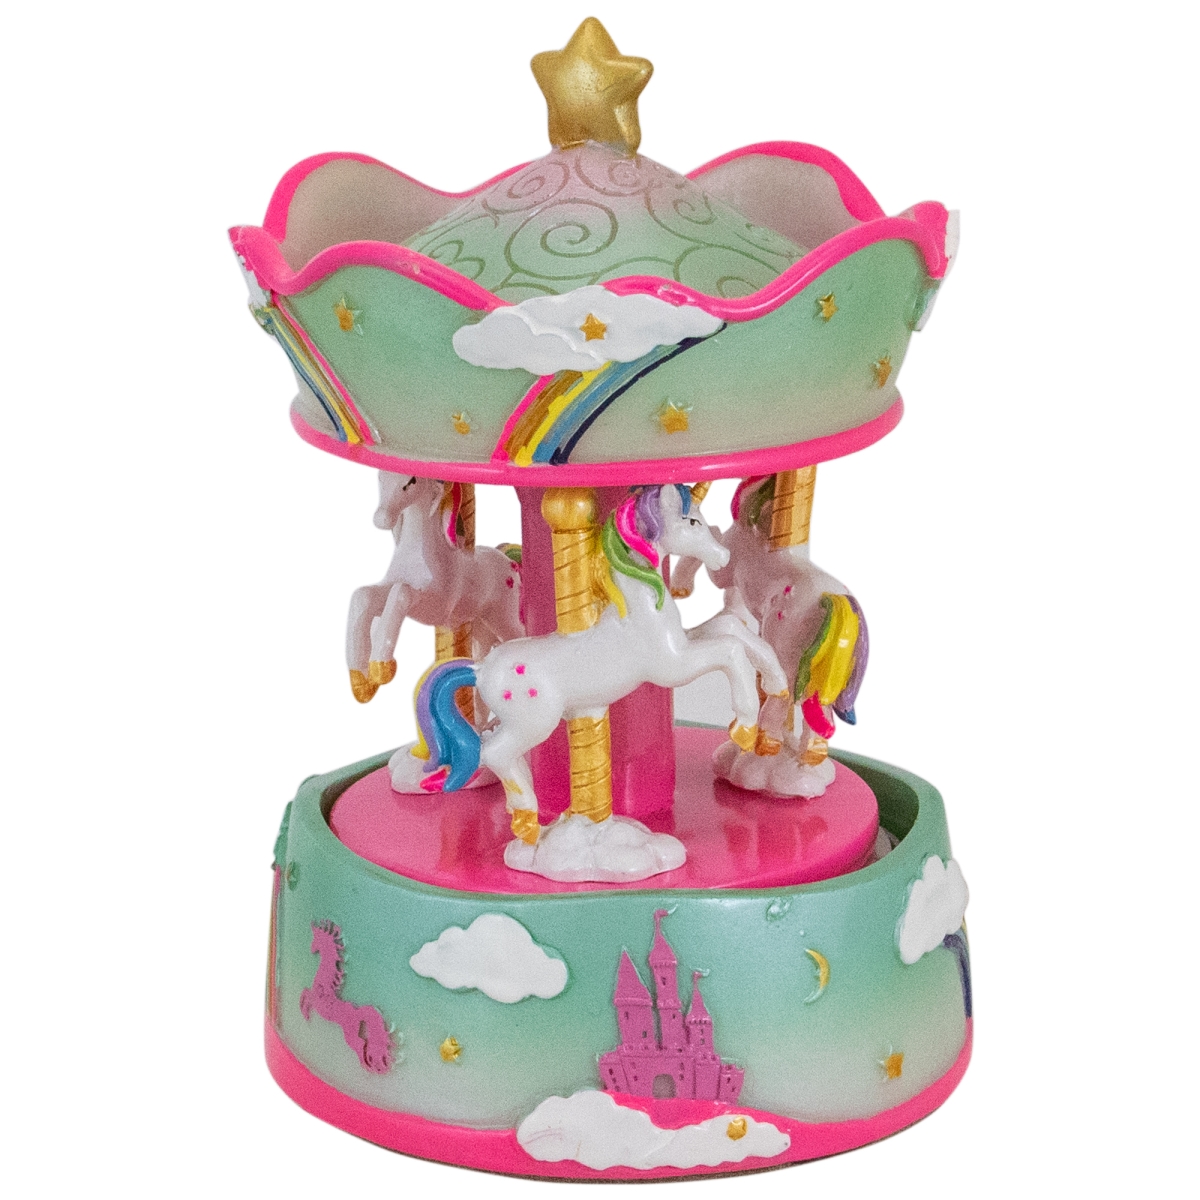 Picture of Northlight 34811765 6.5 in. Childrens Rainbow Rotating Unicorn Musical Carousel